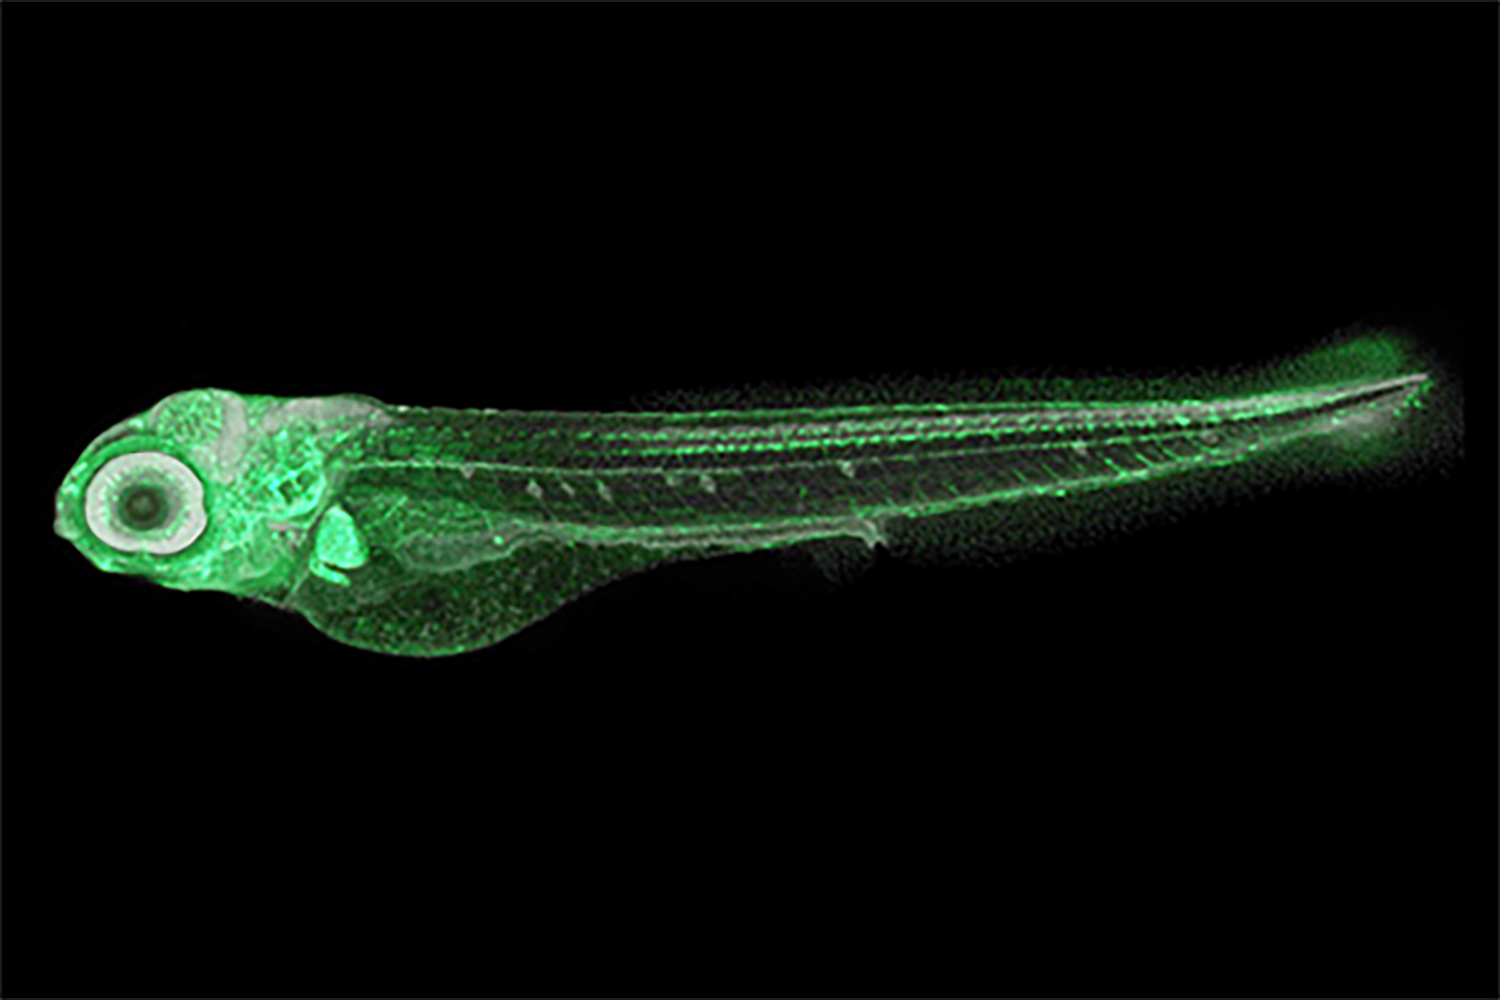 Fluorescent green coloured young zebrafish against a black background.